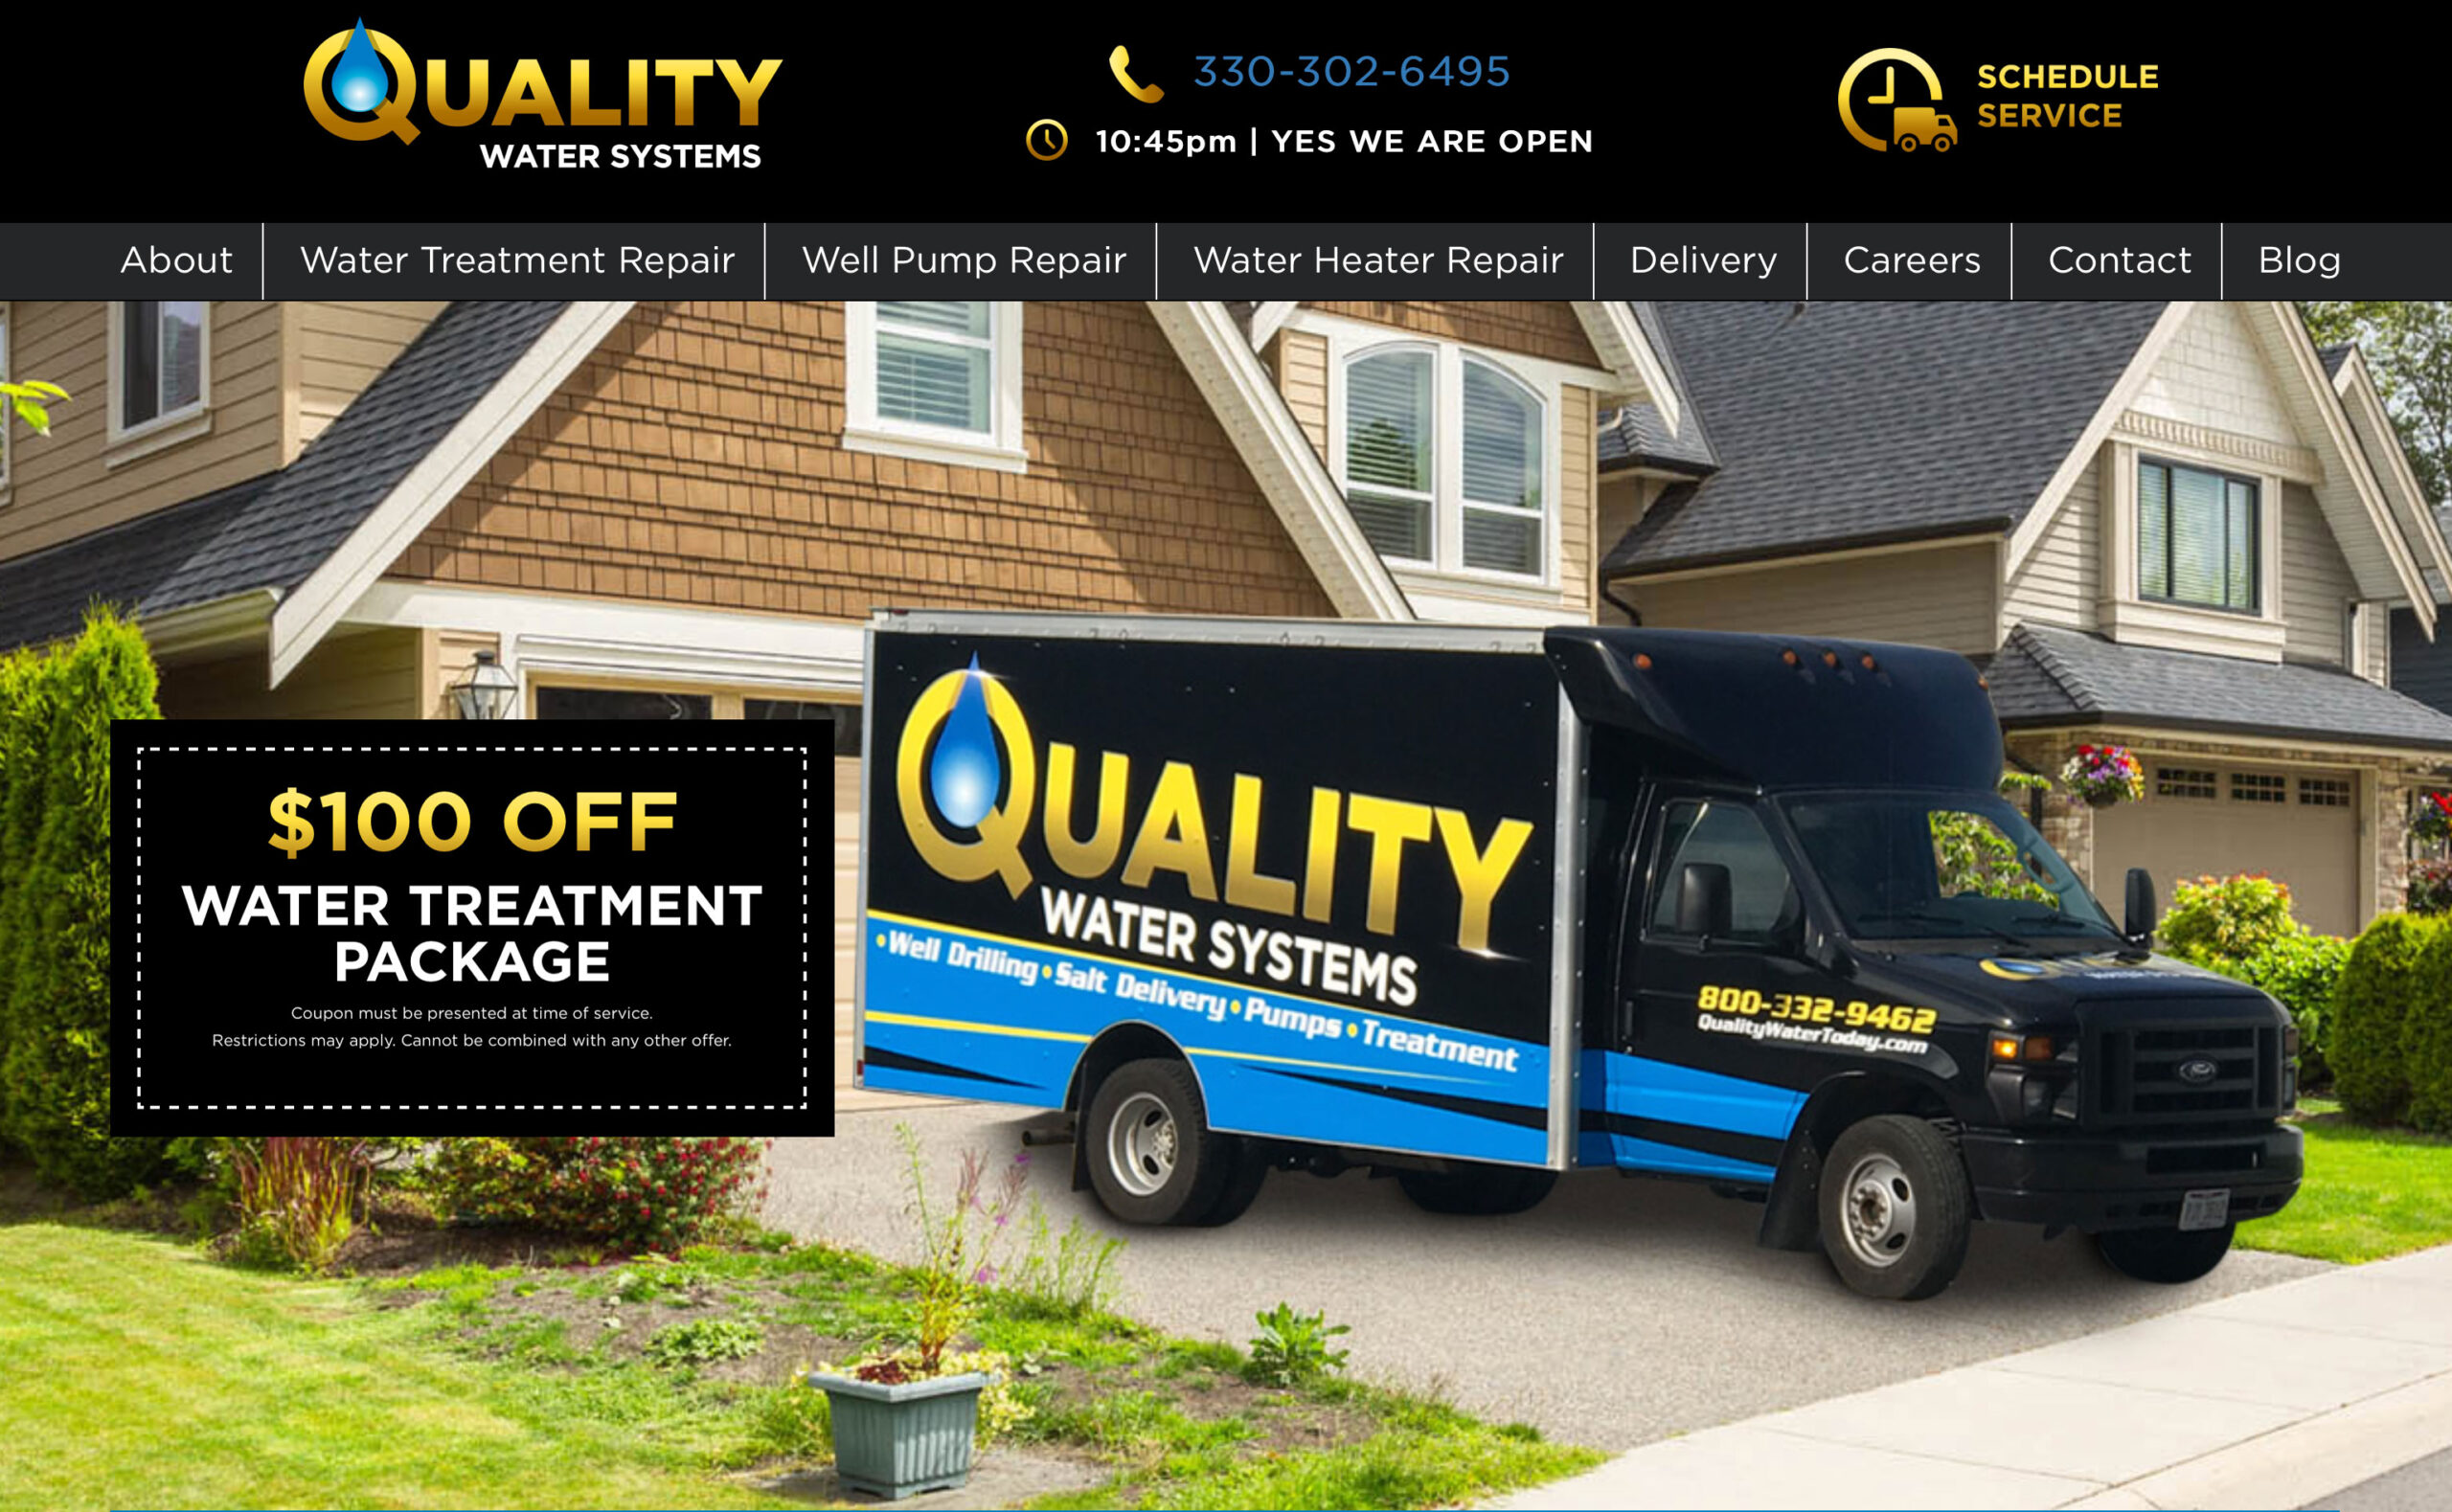 Quality Water Systems Image